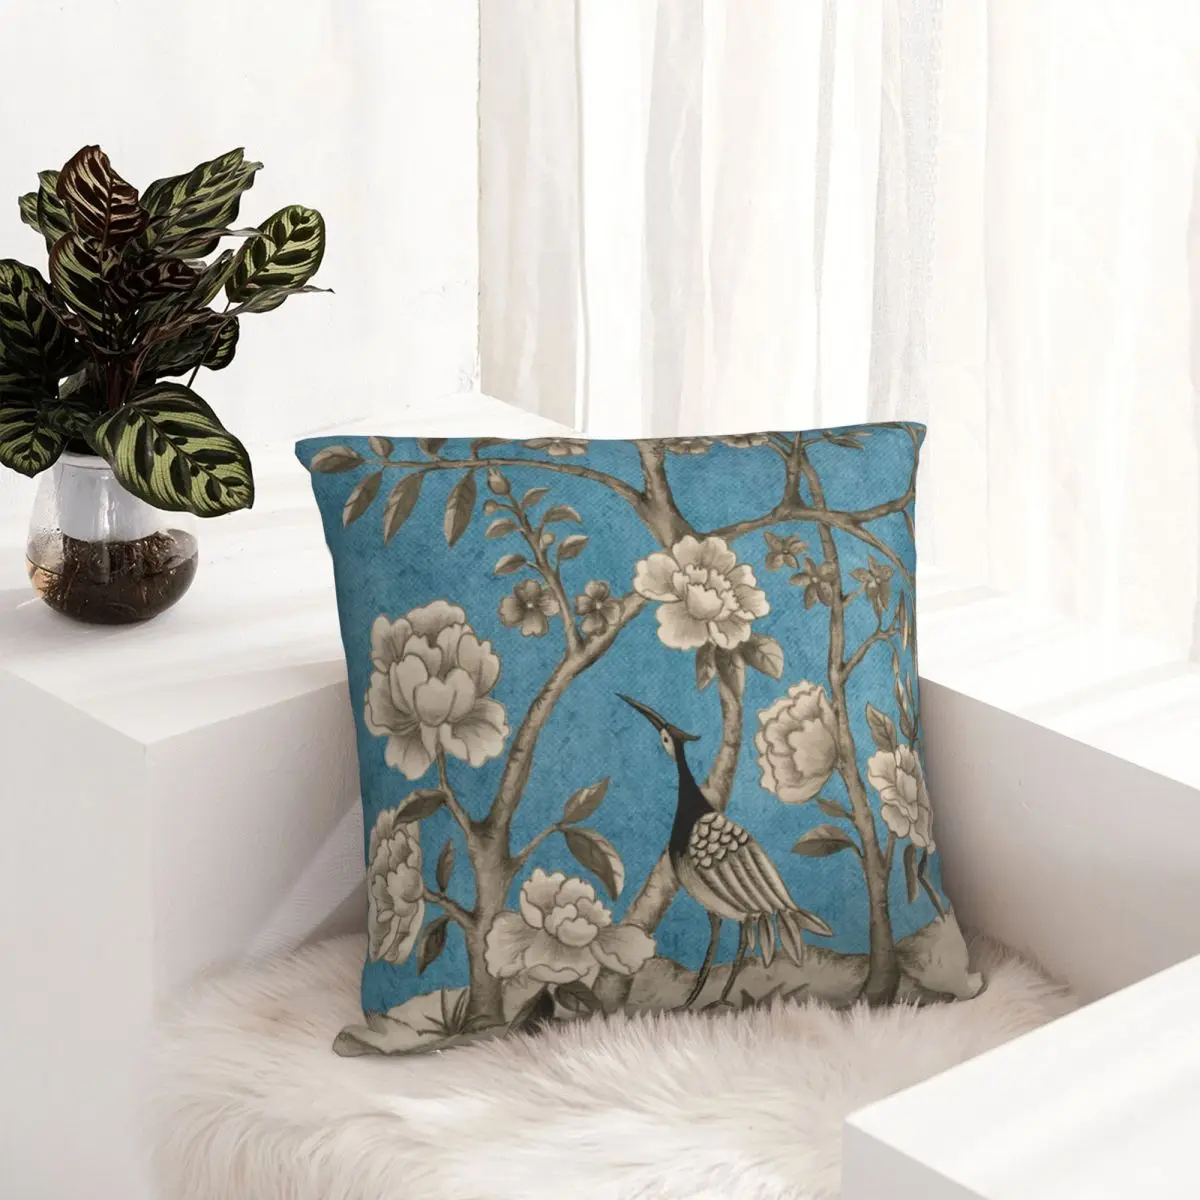 

Navy Blue Chinoiserie Bird And Peonies Floral Pillowcase Printed Cushion Cover Gift Throw Pillow Case Cover Sofa Zipper 18"